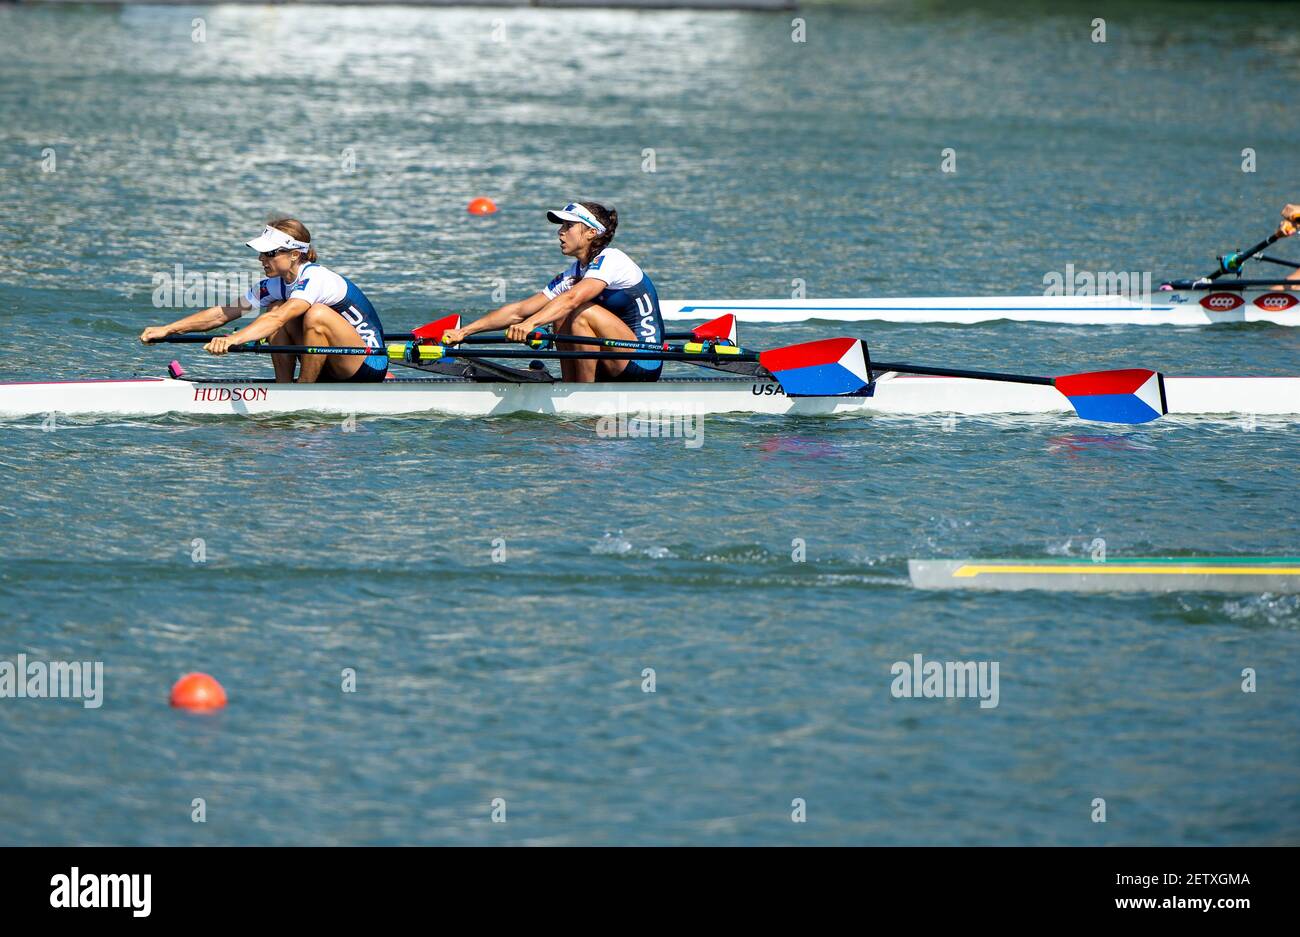 Linz, Austria, Saturday,  31st Aug 2019, FISA World Rowing Championship,  USA LW2X, Bow Michelle SECHSER, Christine CAVALLO,  opposite side from the Tower, Final  B,[Mandatory Credit; Peter SPURRIER/Intersport Images]  11:43:07  31.08.19 Stock Photo